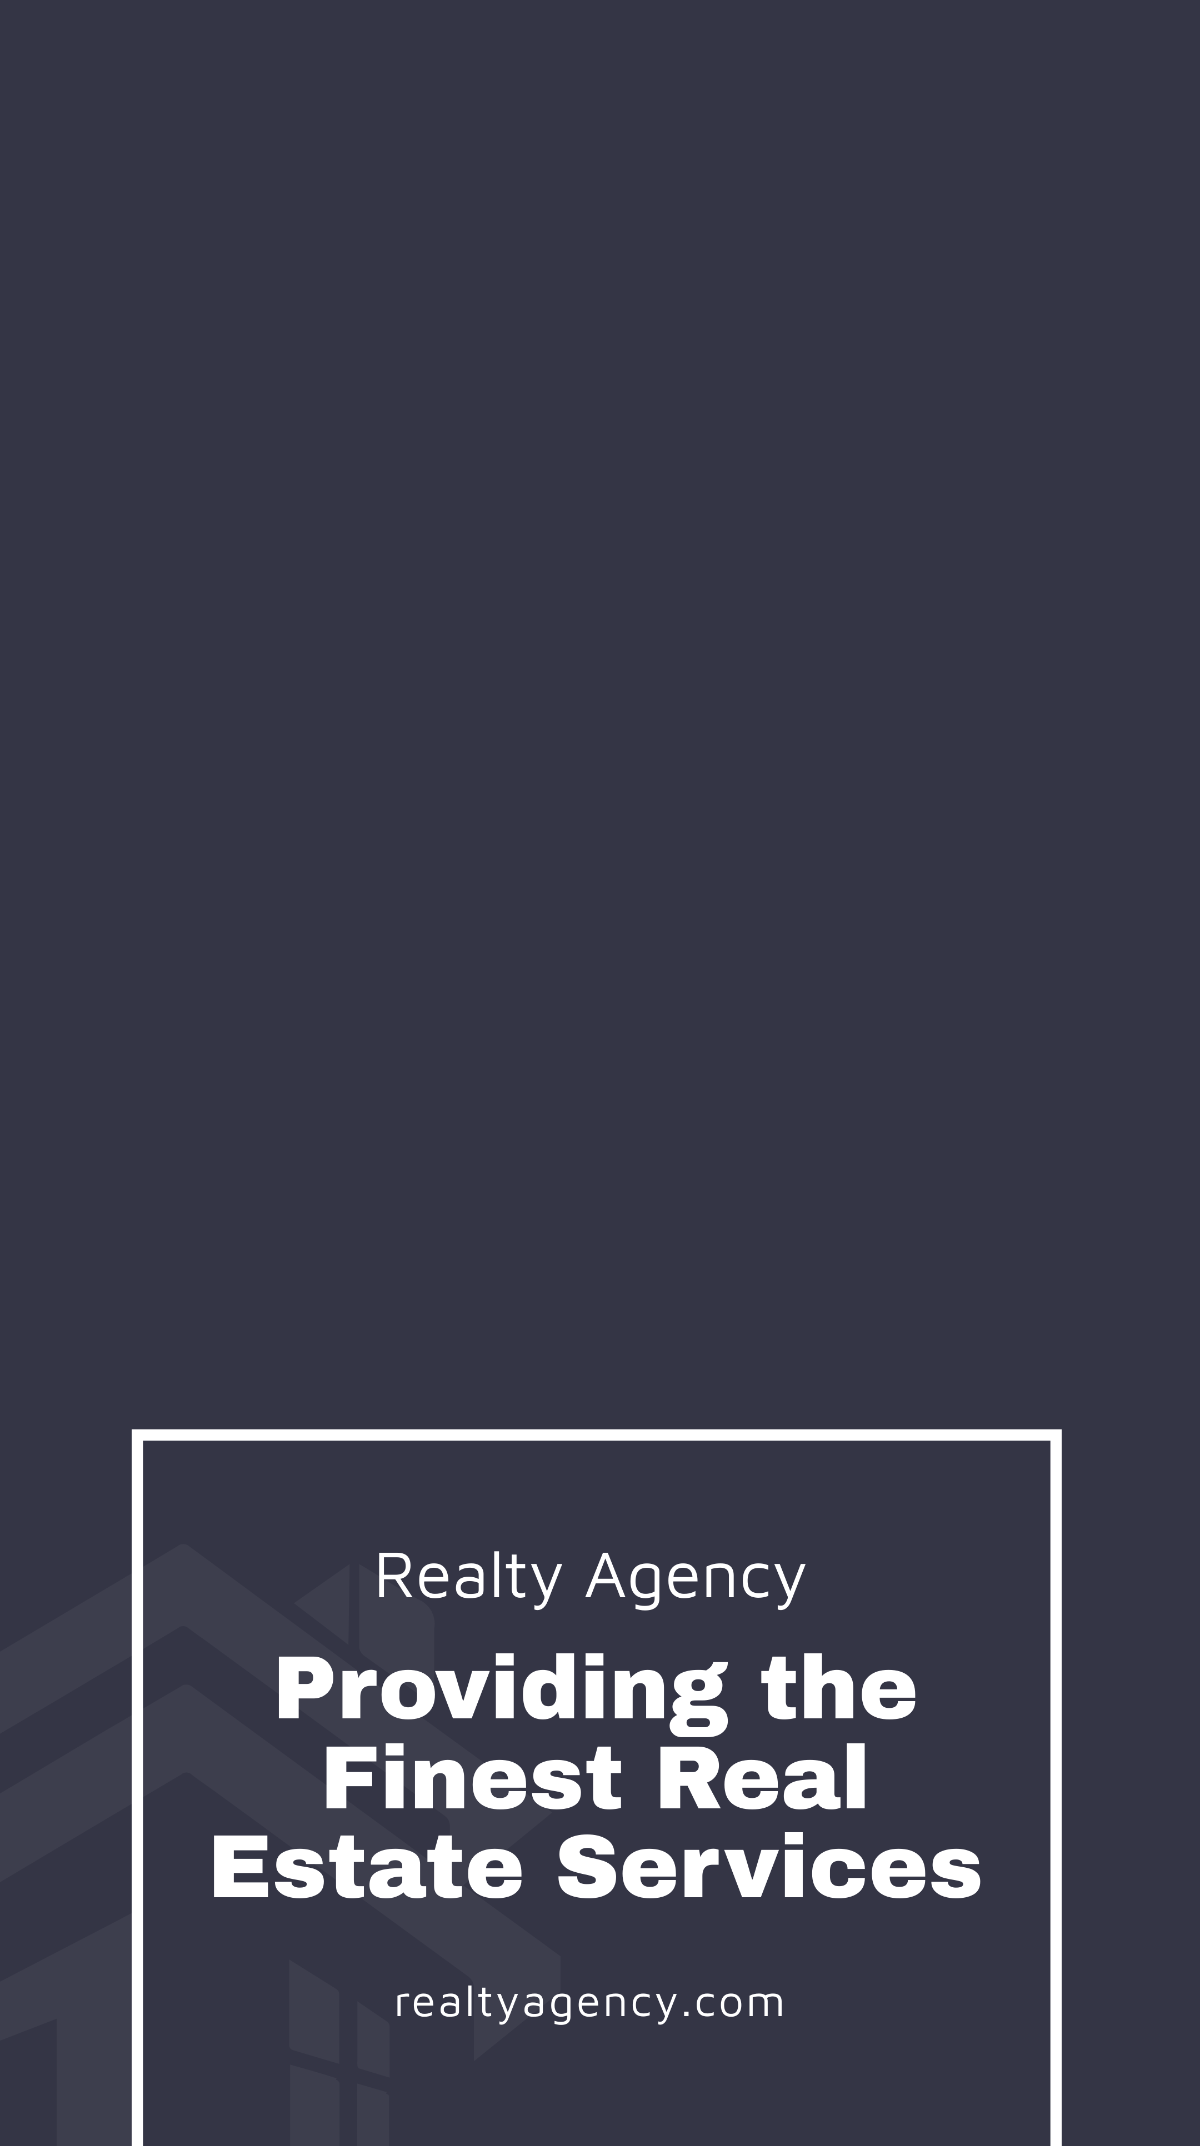 Free Real Estate Agency Snapchat Geofilter Template